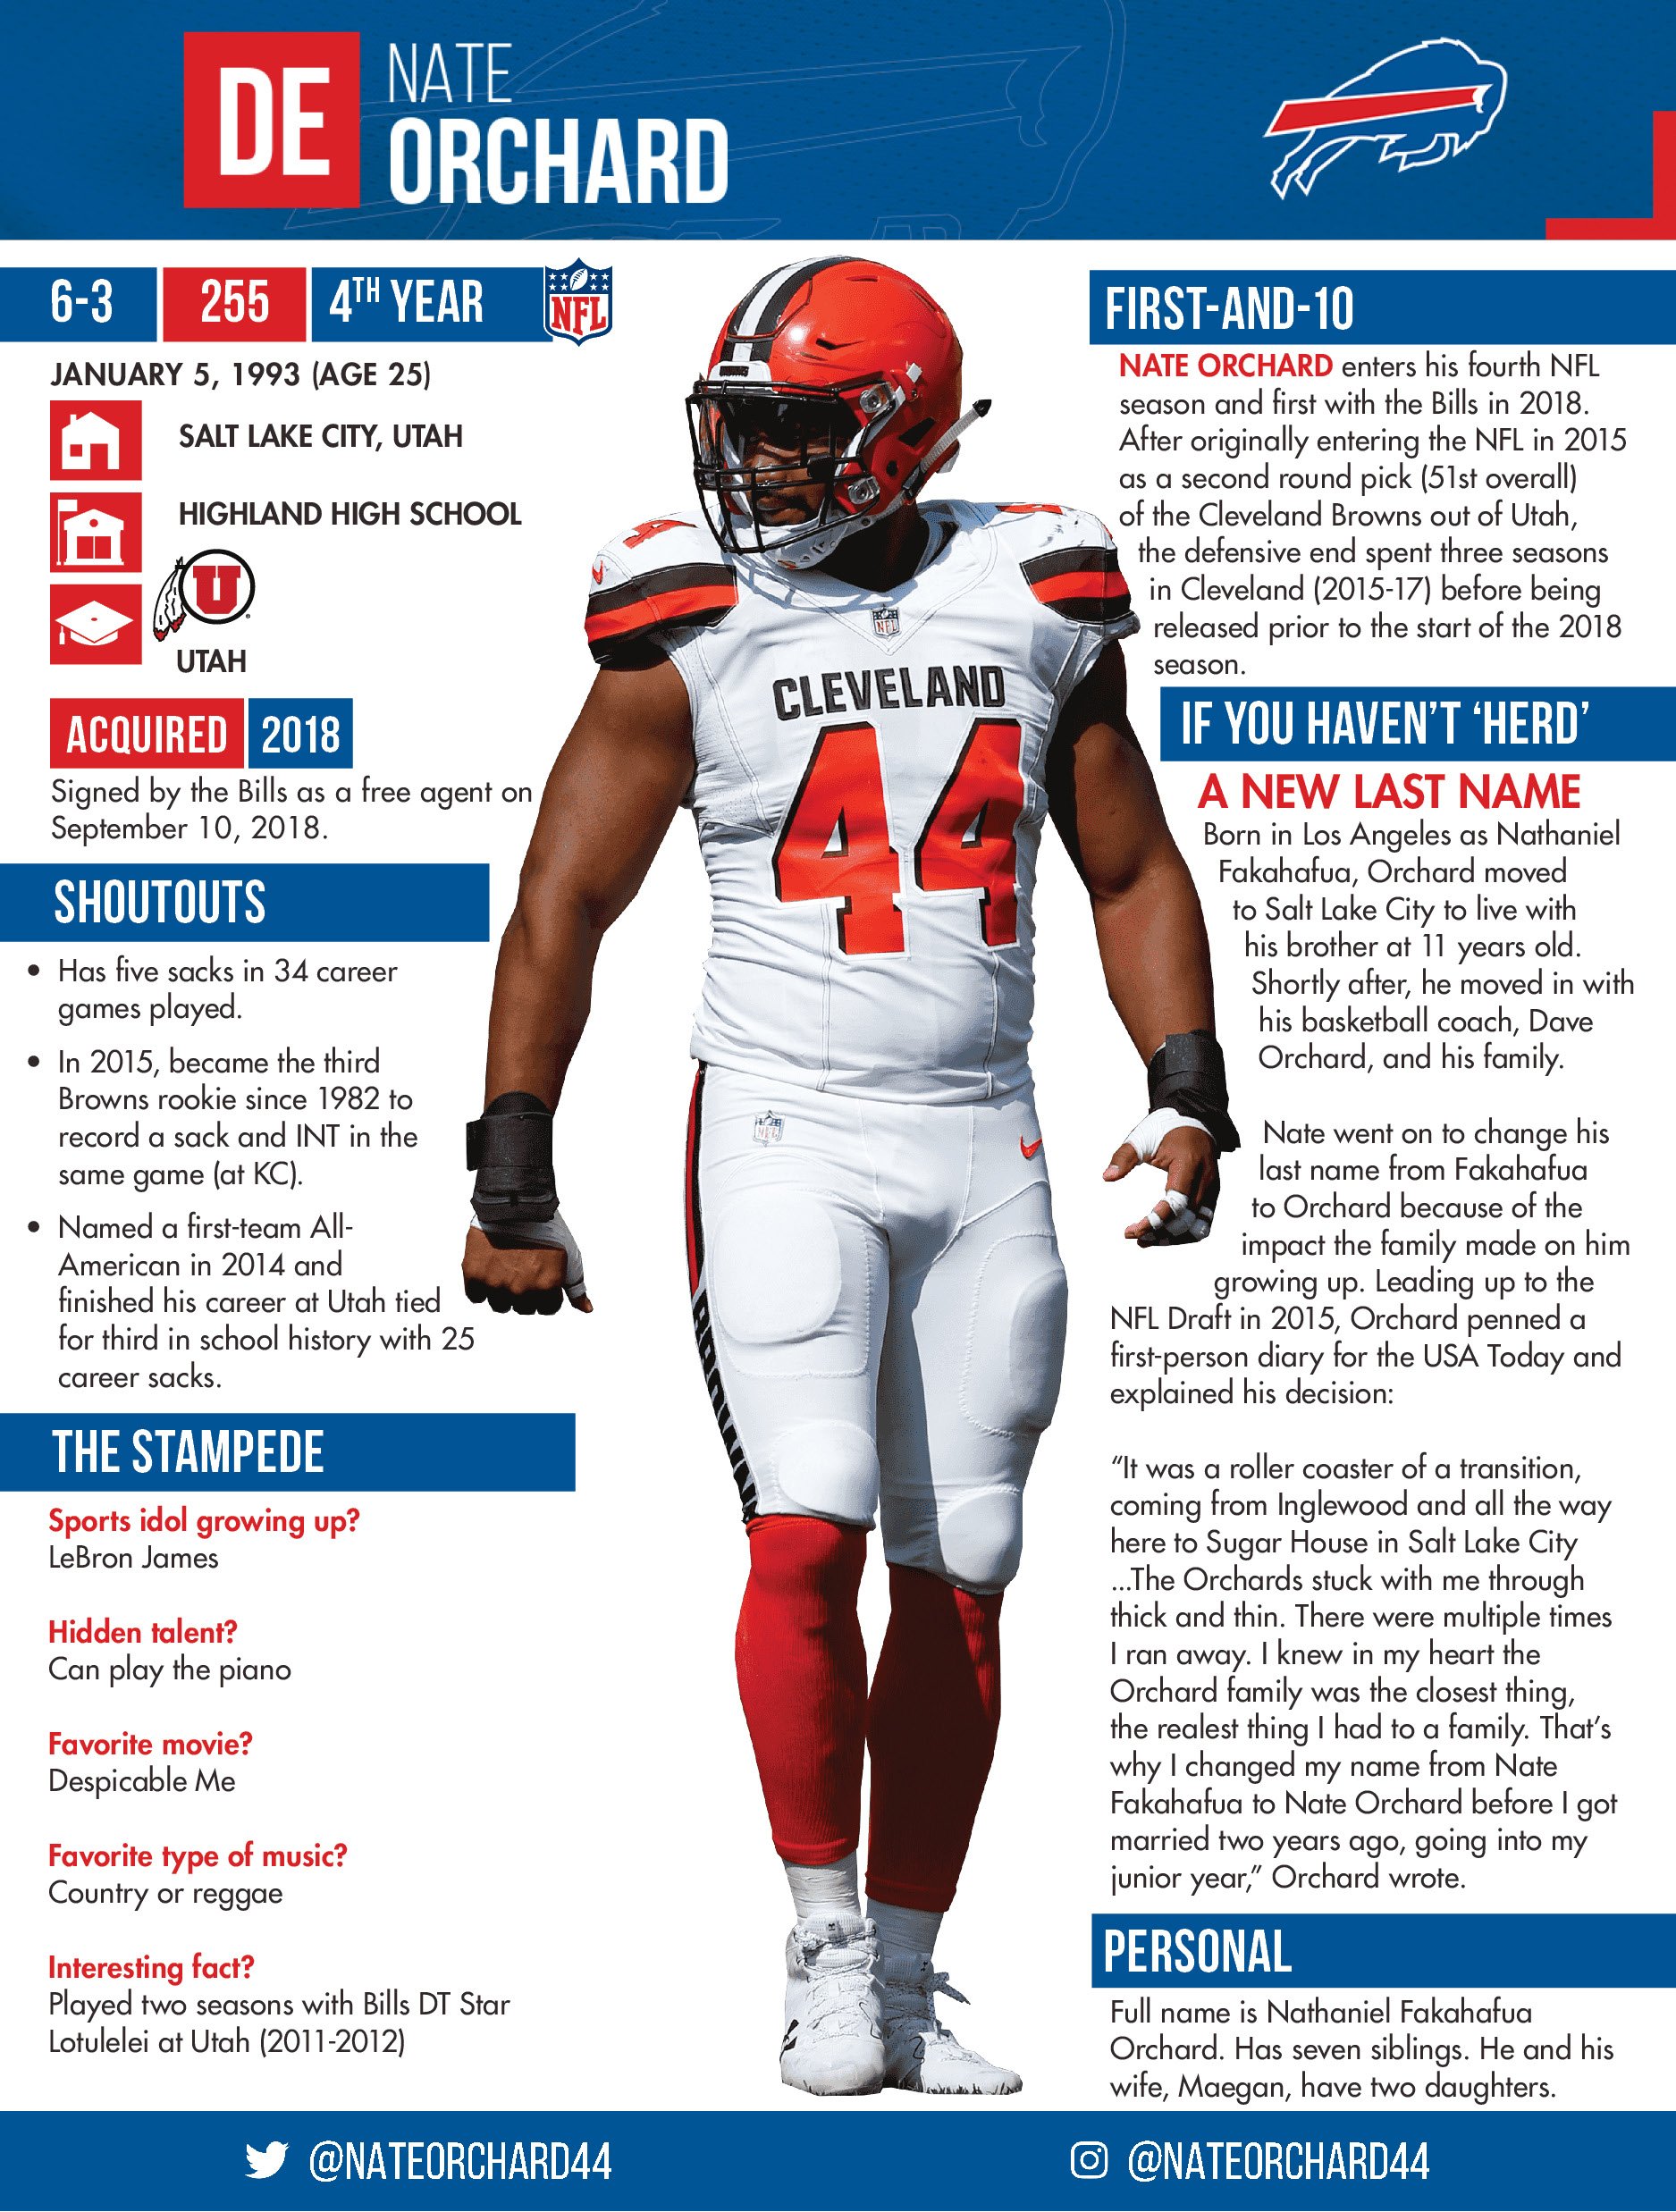 Ung Socialisme Natur Buffalo Bills PR on Twitter: "Signed: DE Nate Orchard (one-year deal)  Released: DT Adolphus Washington More info on the @buffalobills newest edge  rusher: https://t.co/NXcRMS4pLb" / Twitter